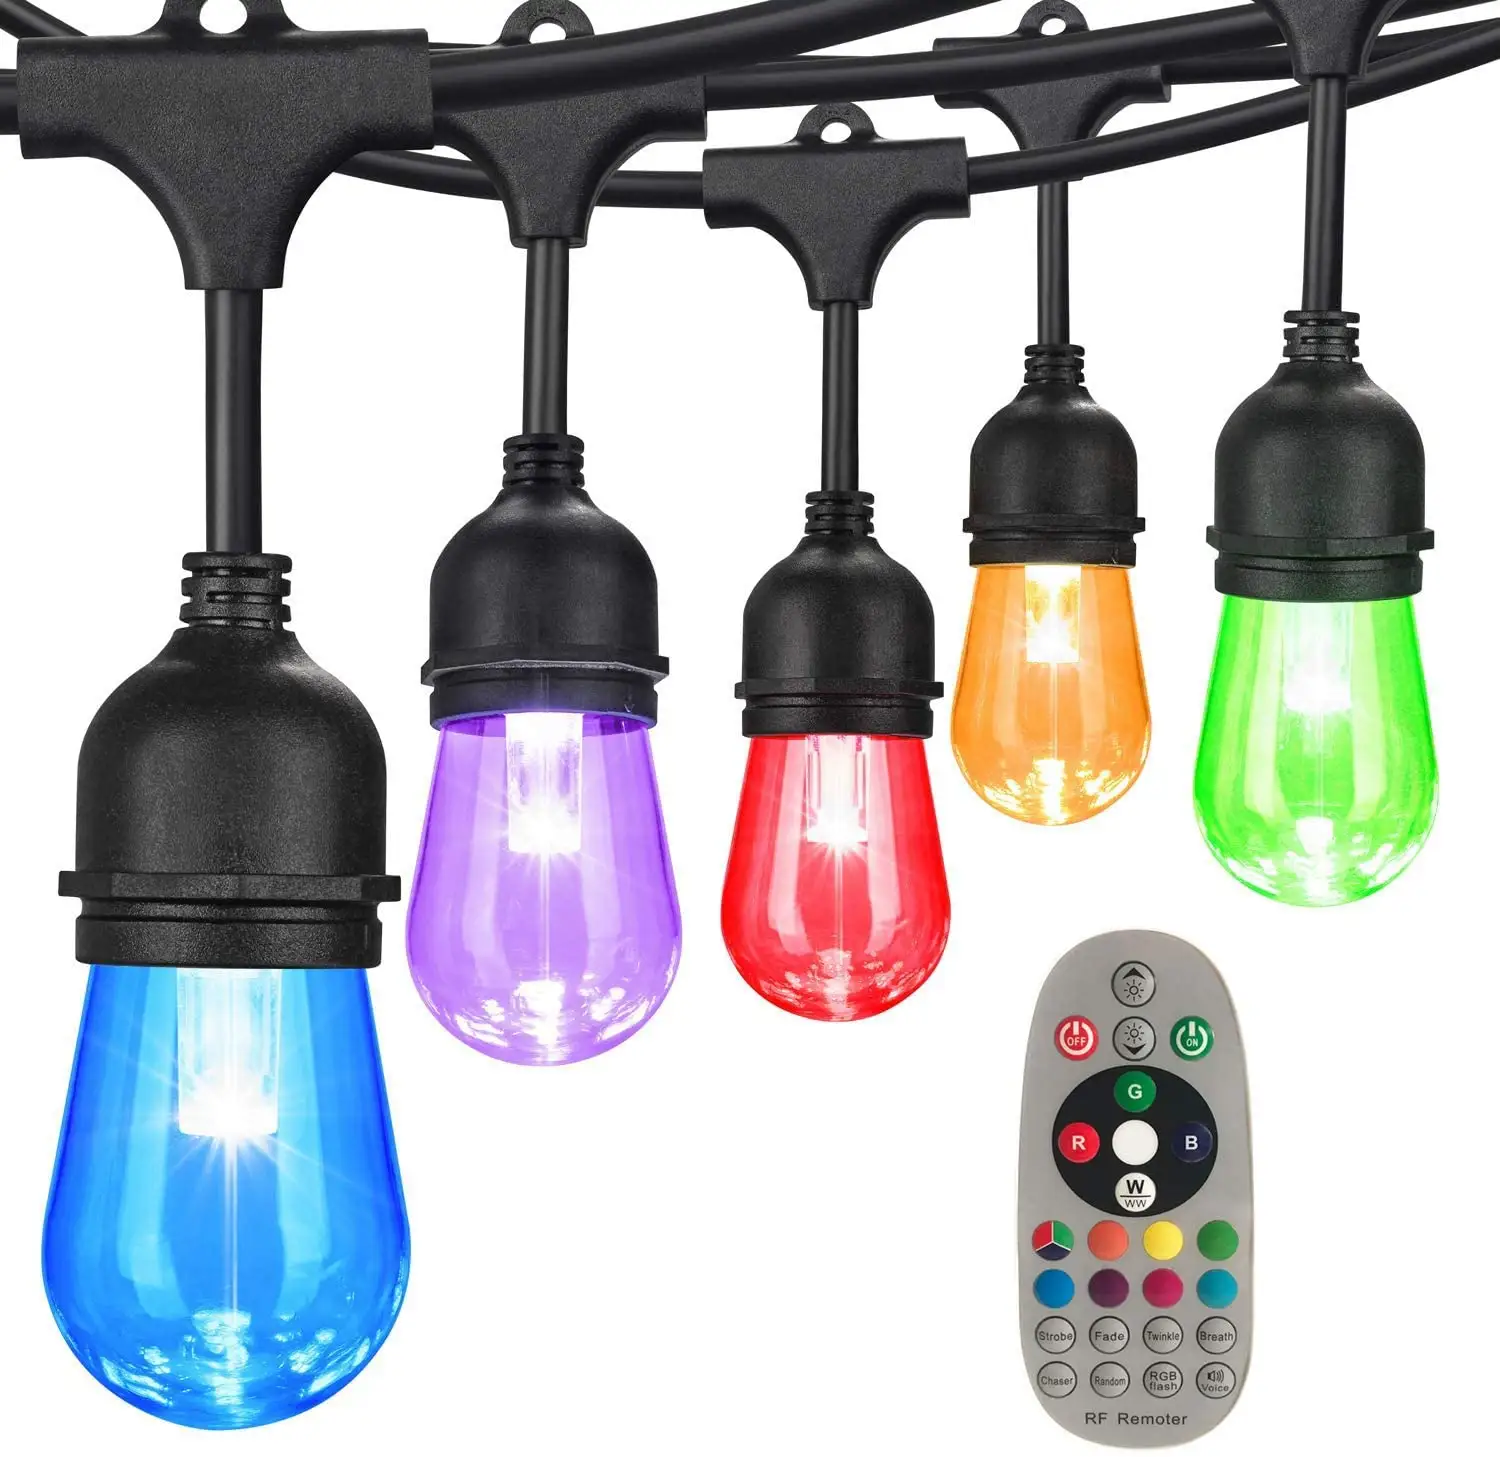 Decoration Color String Lights Voice Control LED Changing RGB Weatherproof S14 Bulbs Solar Outdoor Fairy String Light